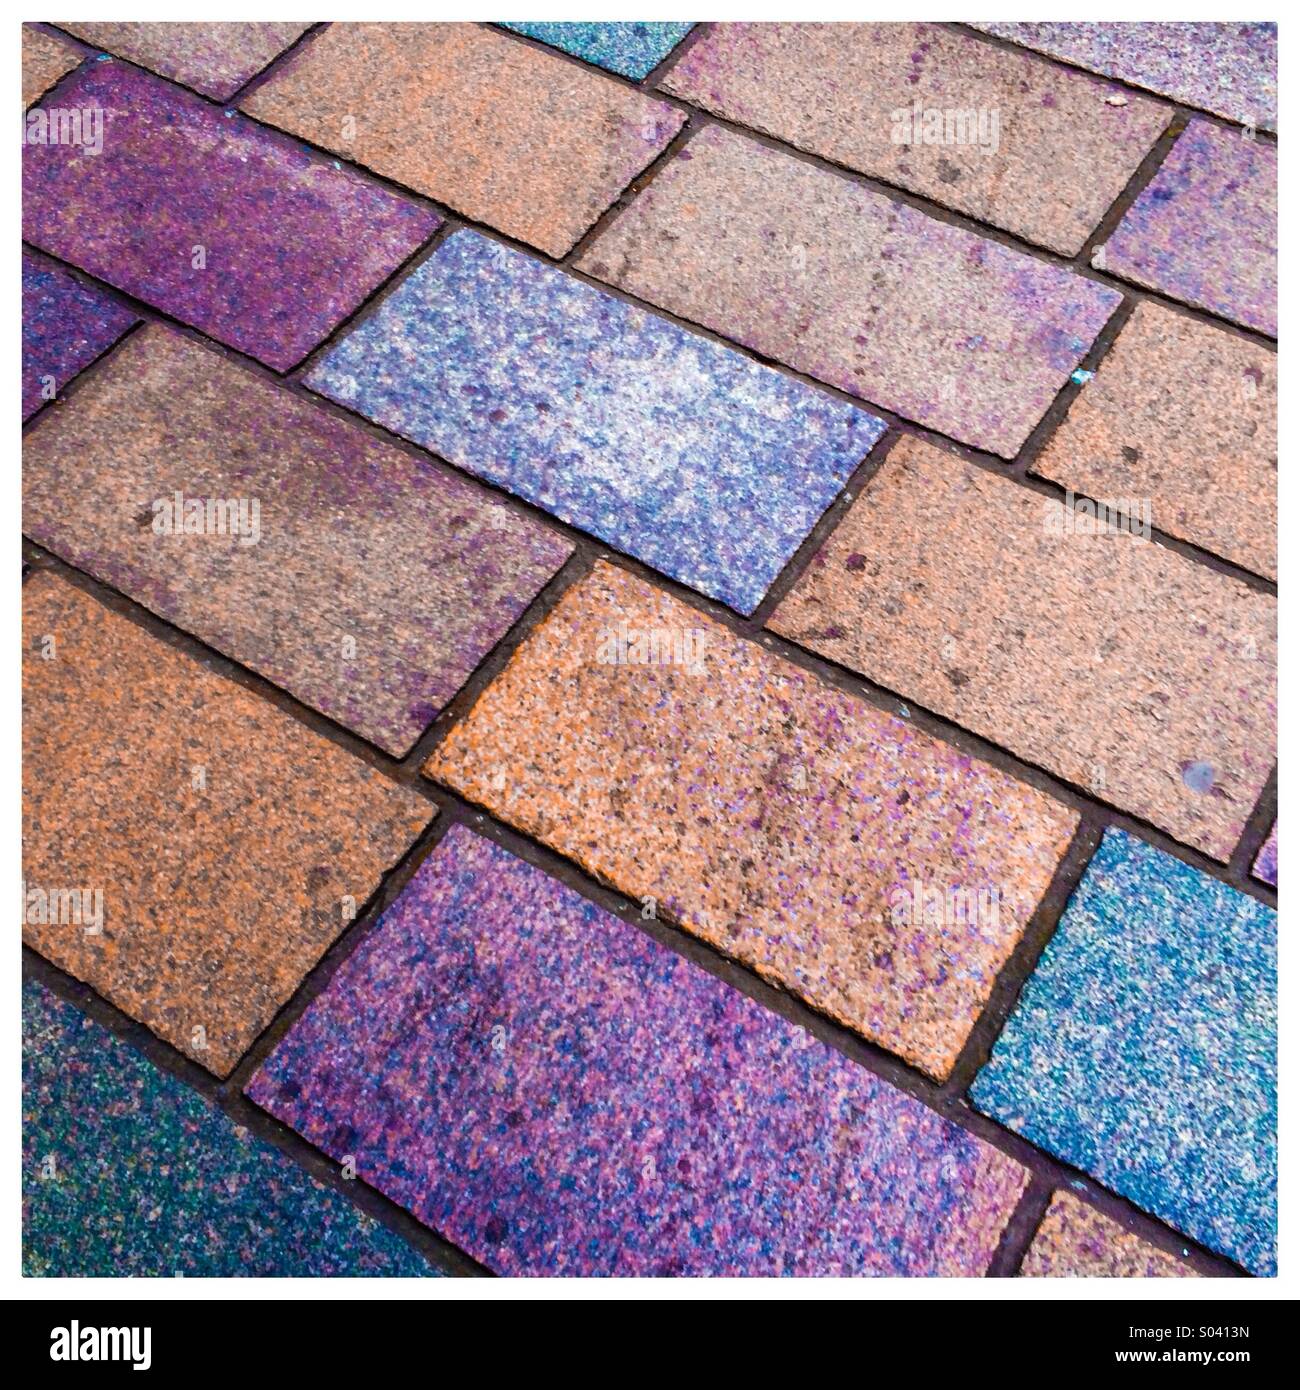 Colourful pavement background Stock Photo